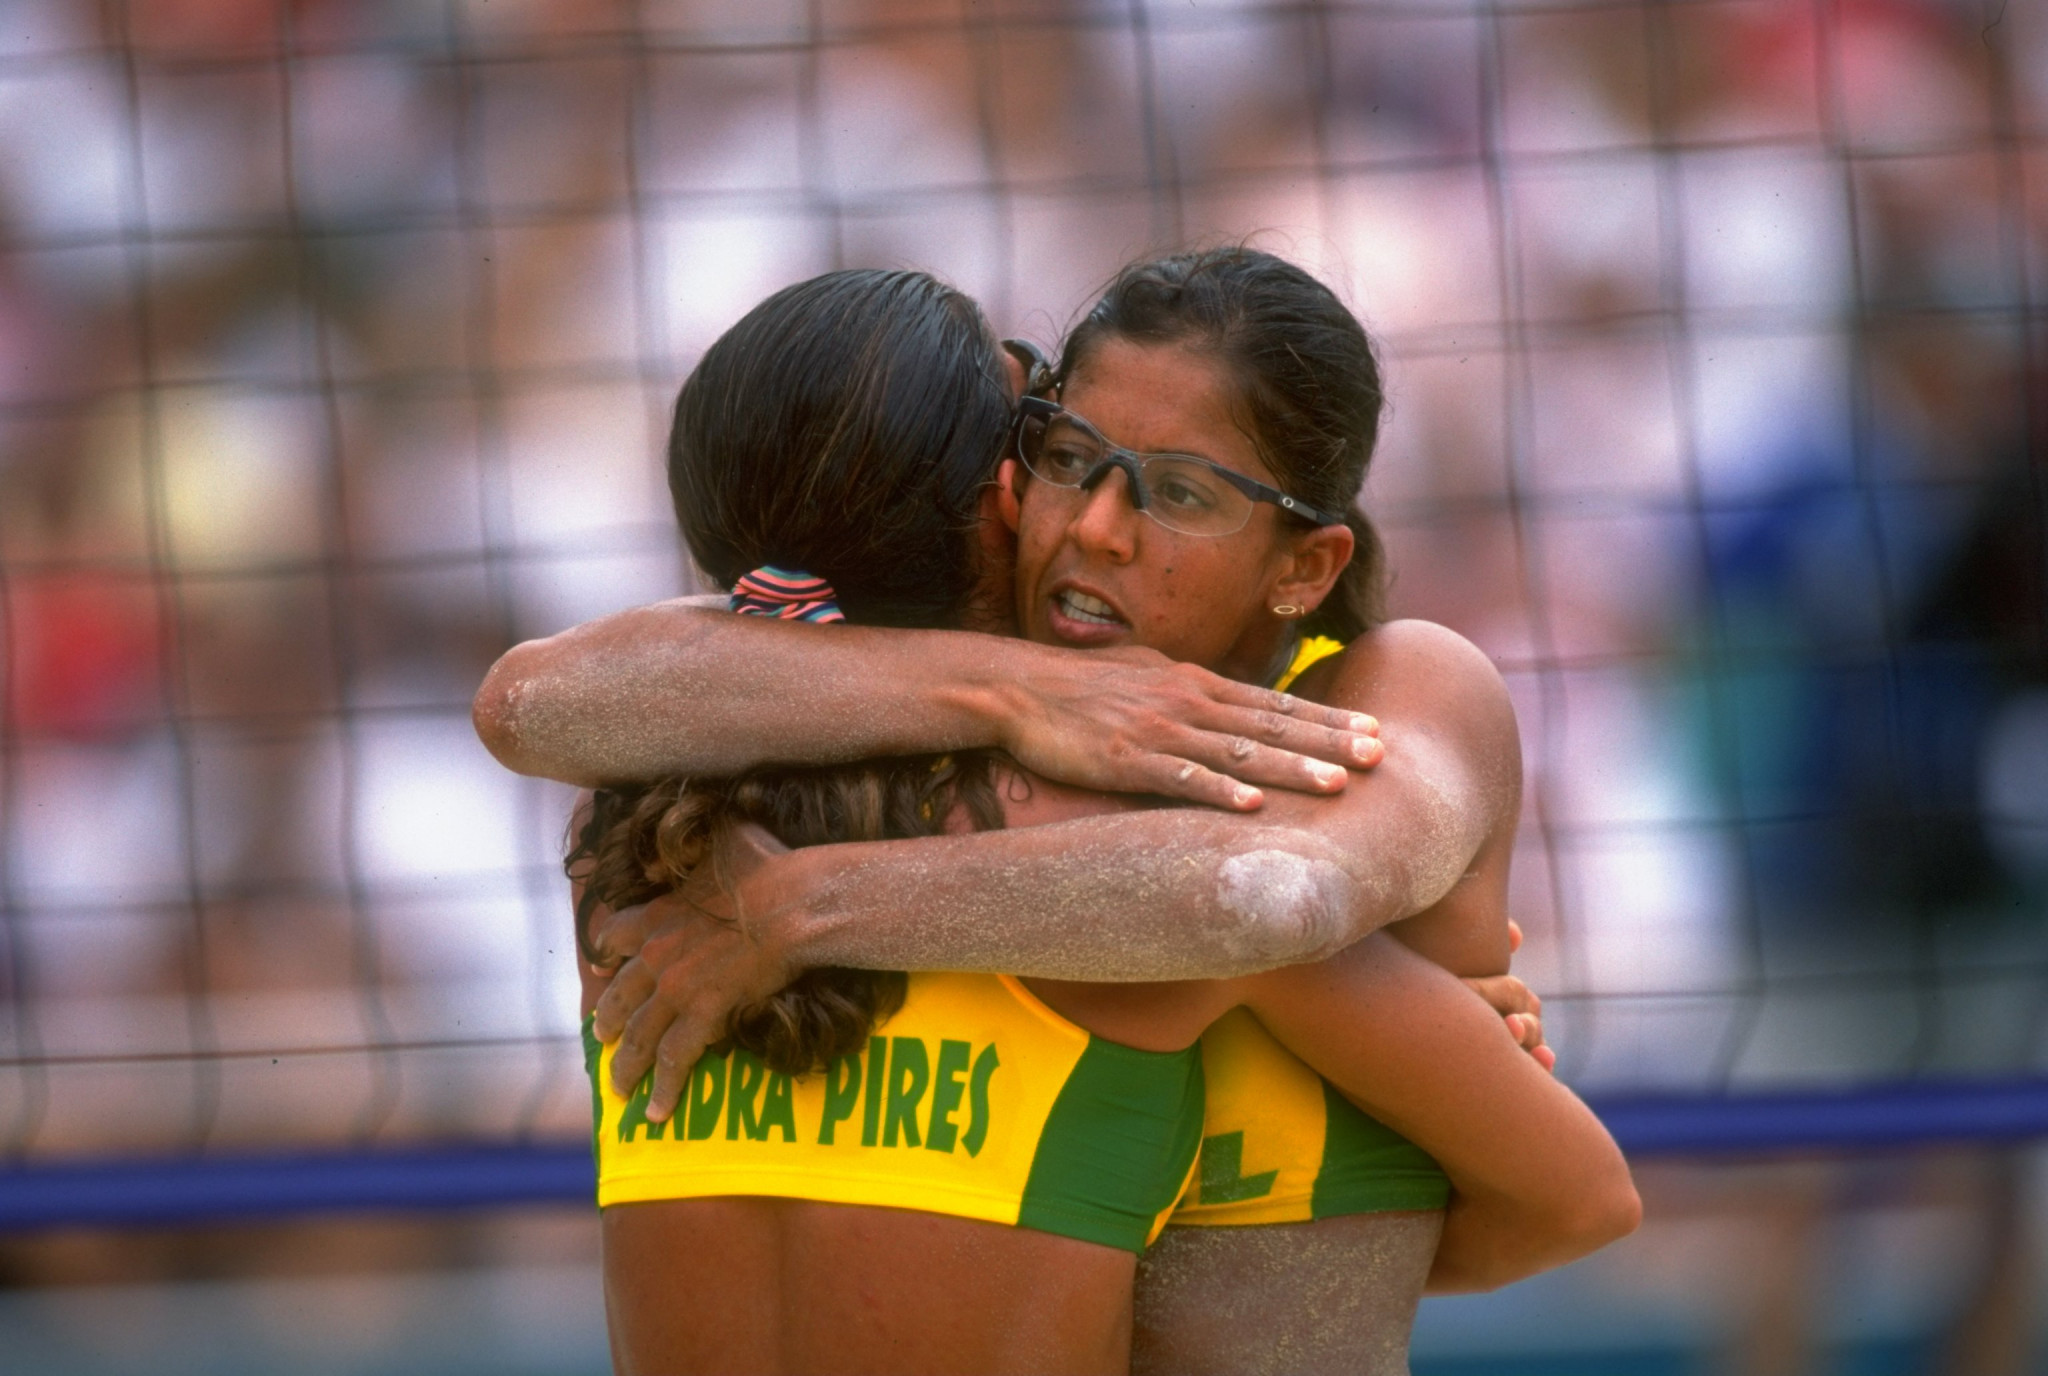 Jacqueline Silva, facing the camera, who won women's beach volleyball gold at the Atlanta 1996 Olympics, is among the speakers for the Brazilian Olympic Committee's first Women in Sport forum ©Getty Images